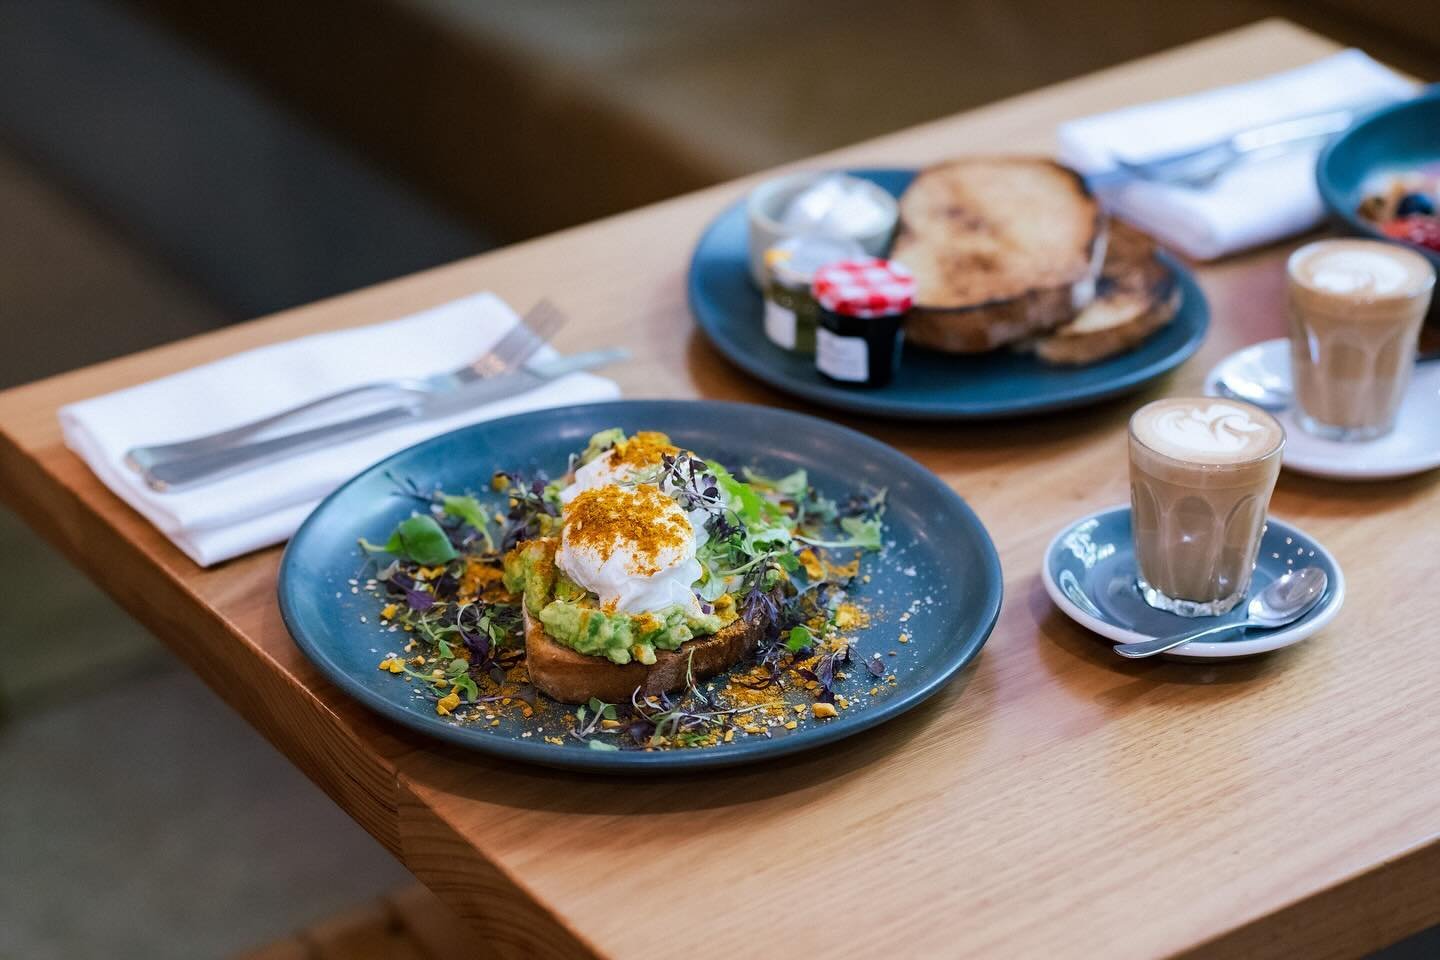 We are for breakfast every day of the Easter Long weekend! From 8am to 11am.
To make a booking, just visit our website www.treasury1860.com.au

Photo: @davidvincentrocca 
Coffee: @kiccocoffee 

#smashedavo #avocado #brunch #breakfast #adelaide #adela